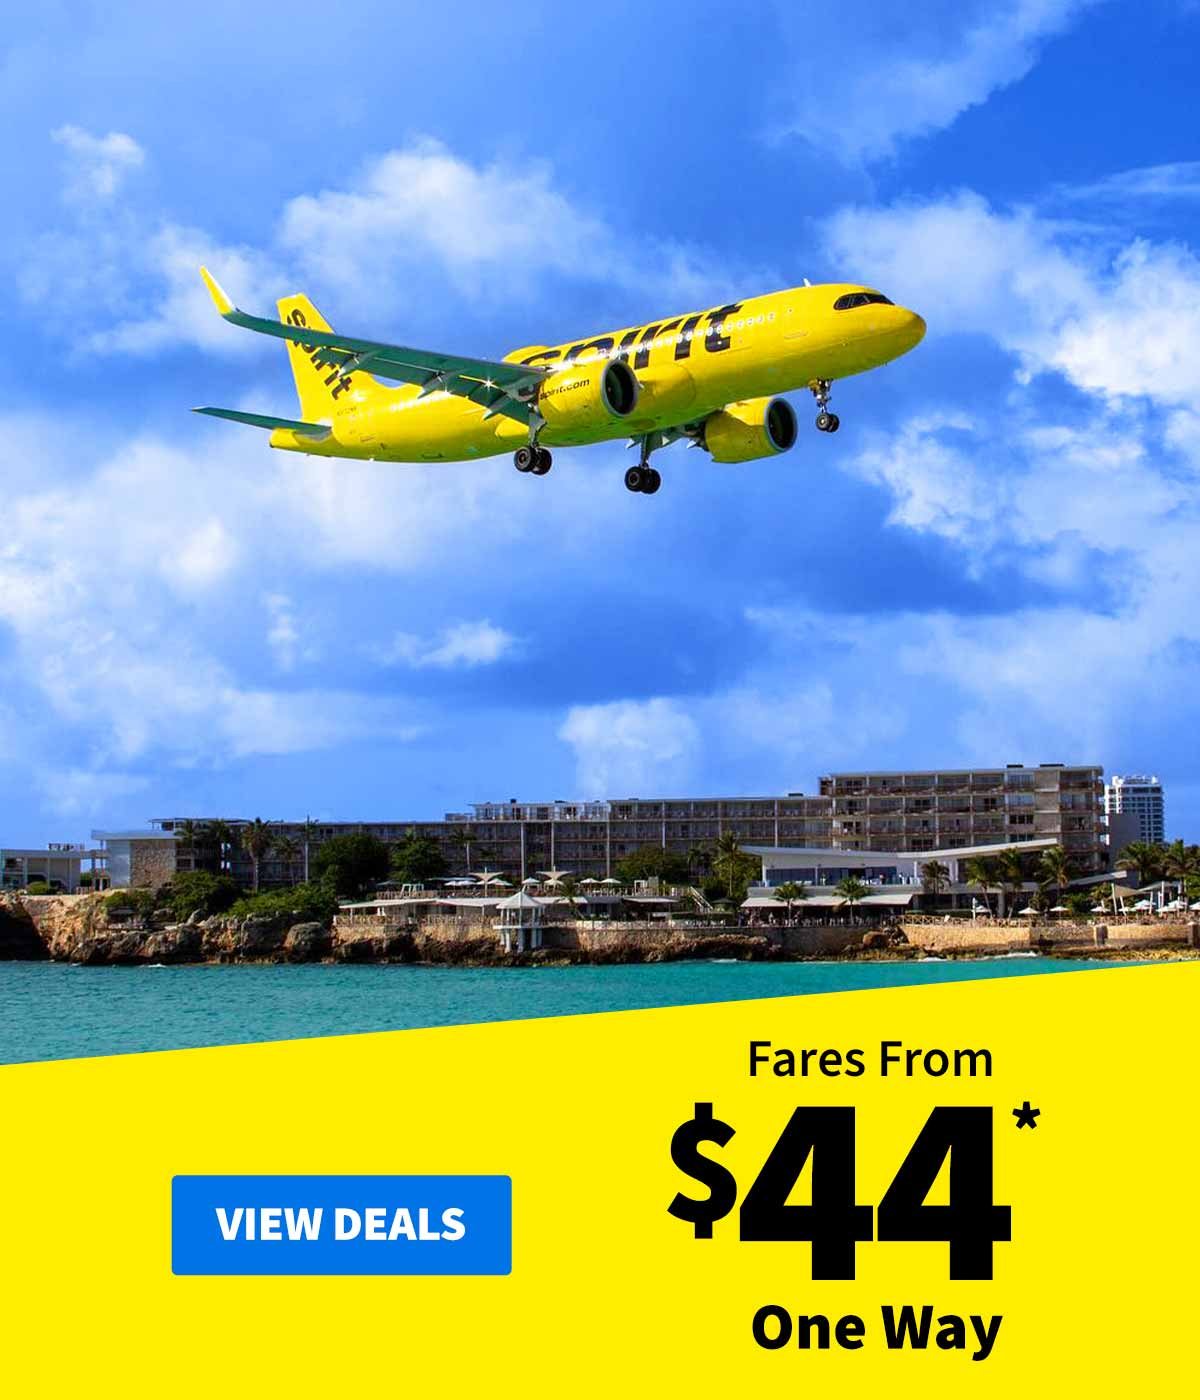 Fares From $44* One Way